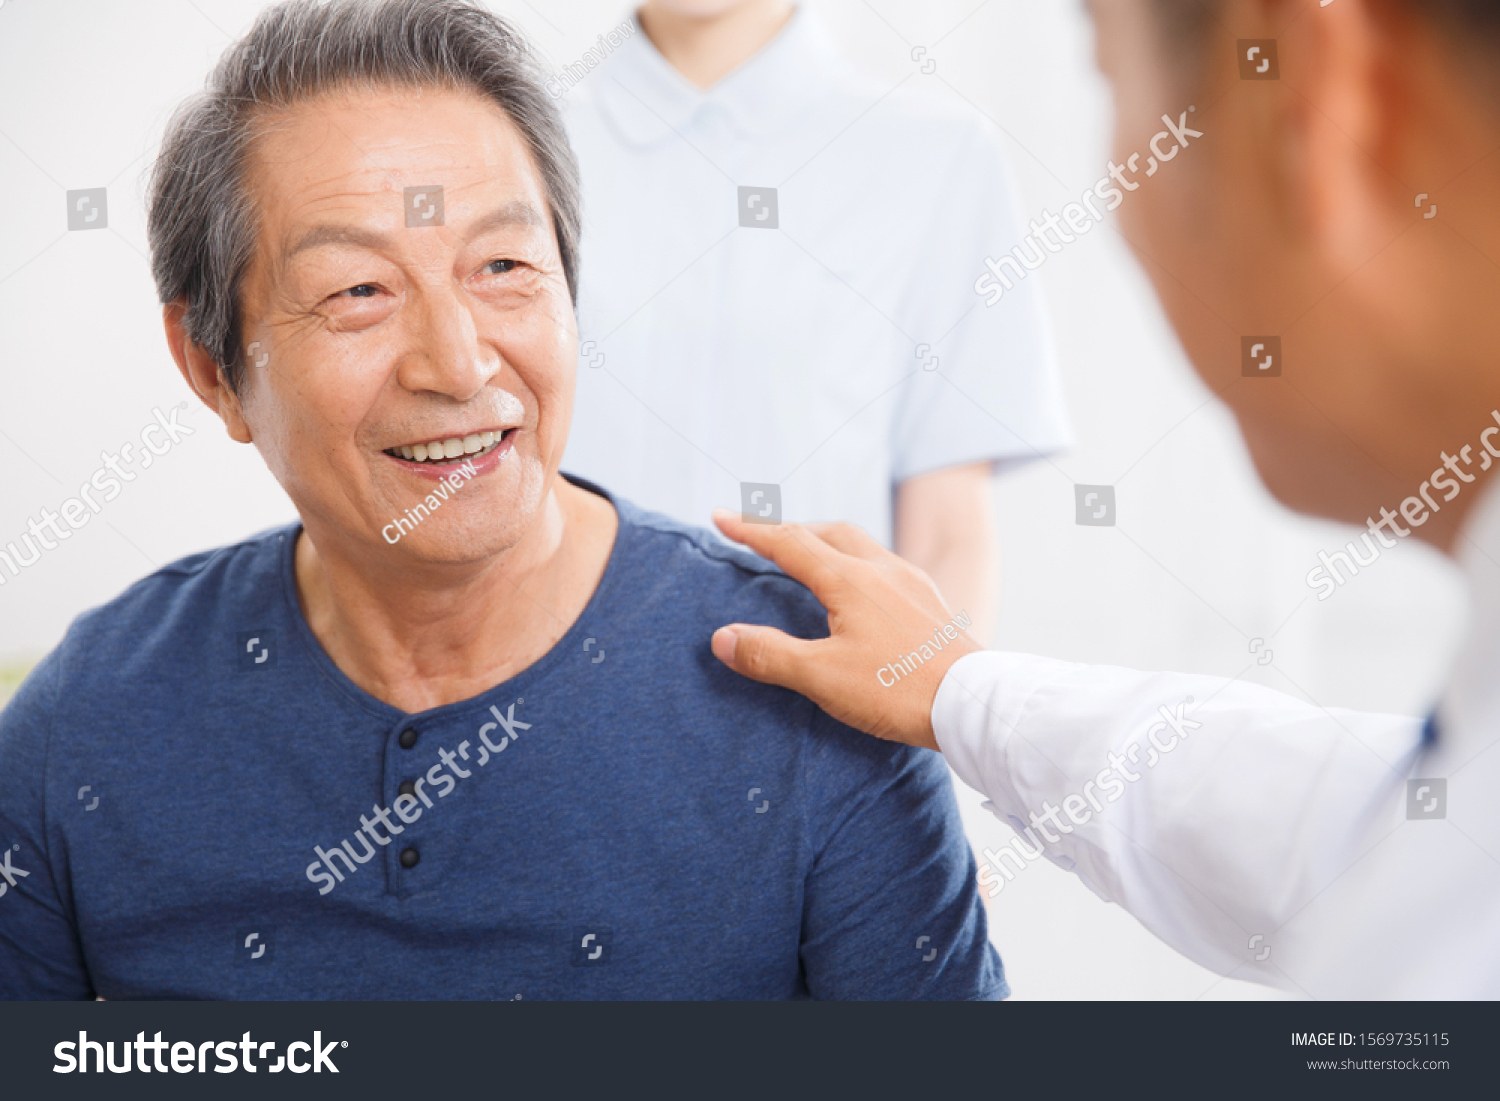 Patients Doctors Three Chinese People Stock Photo 1569735115 | Shutterstock